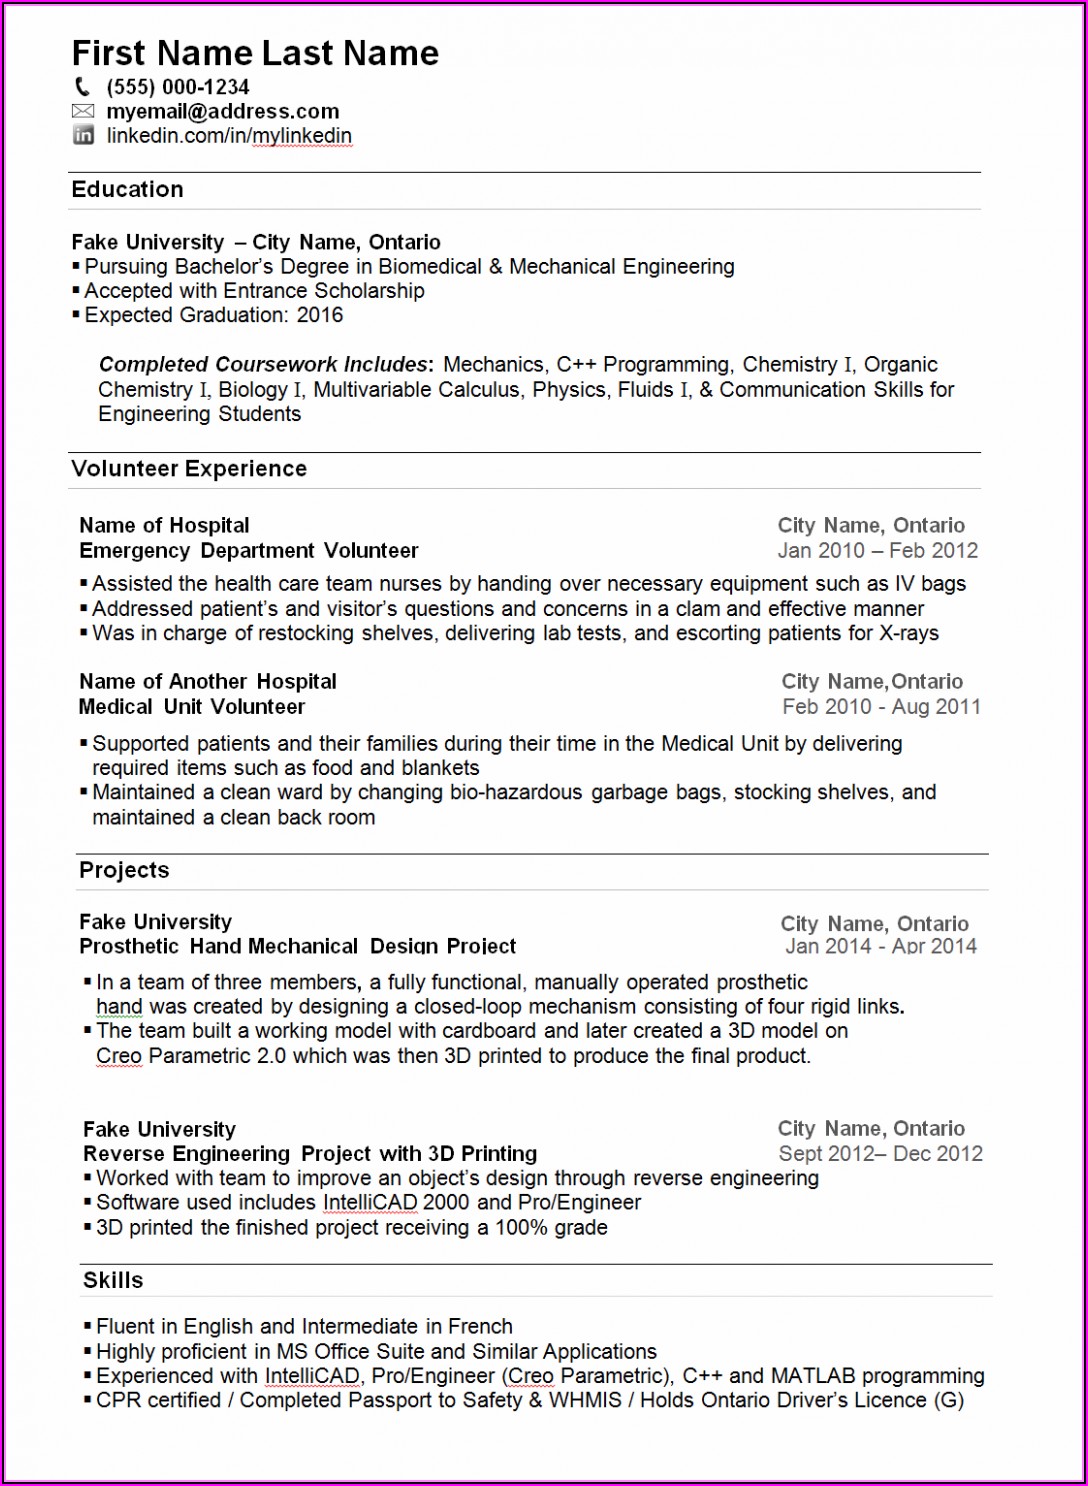 Resume Format For Job Interview Pdf Free Download